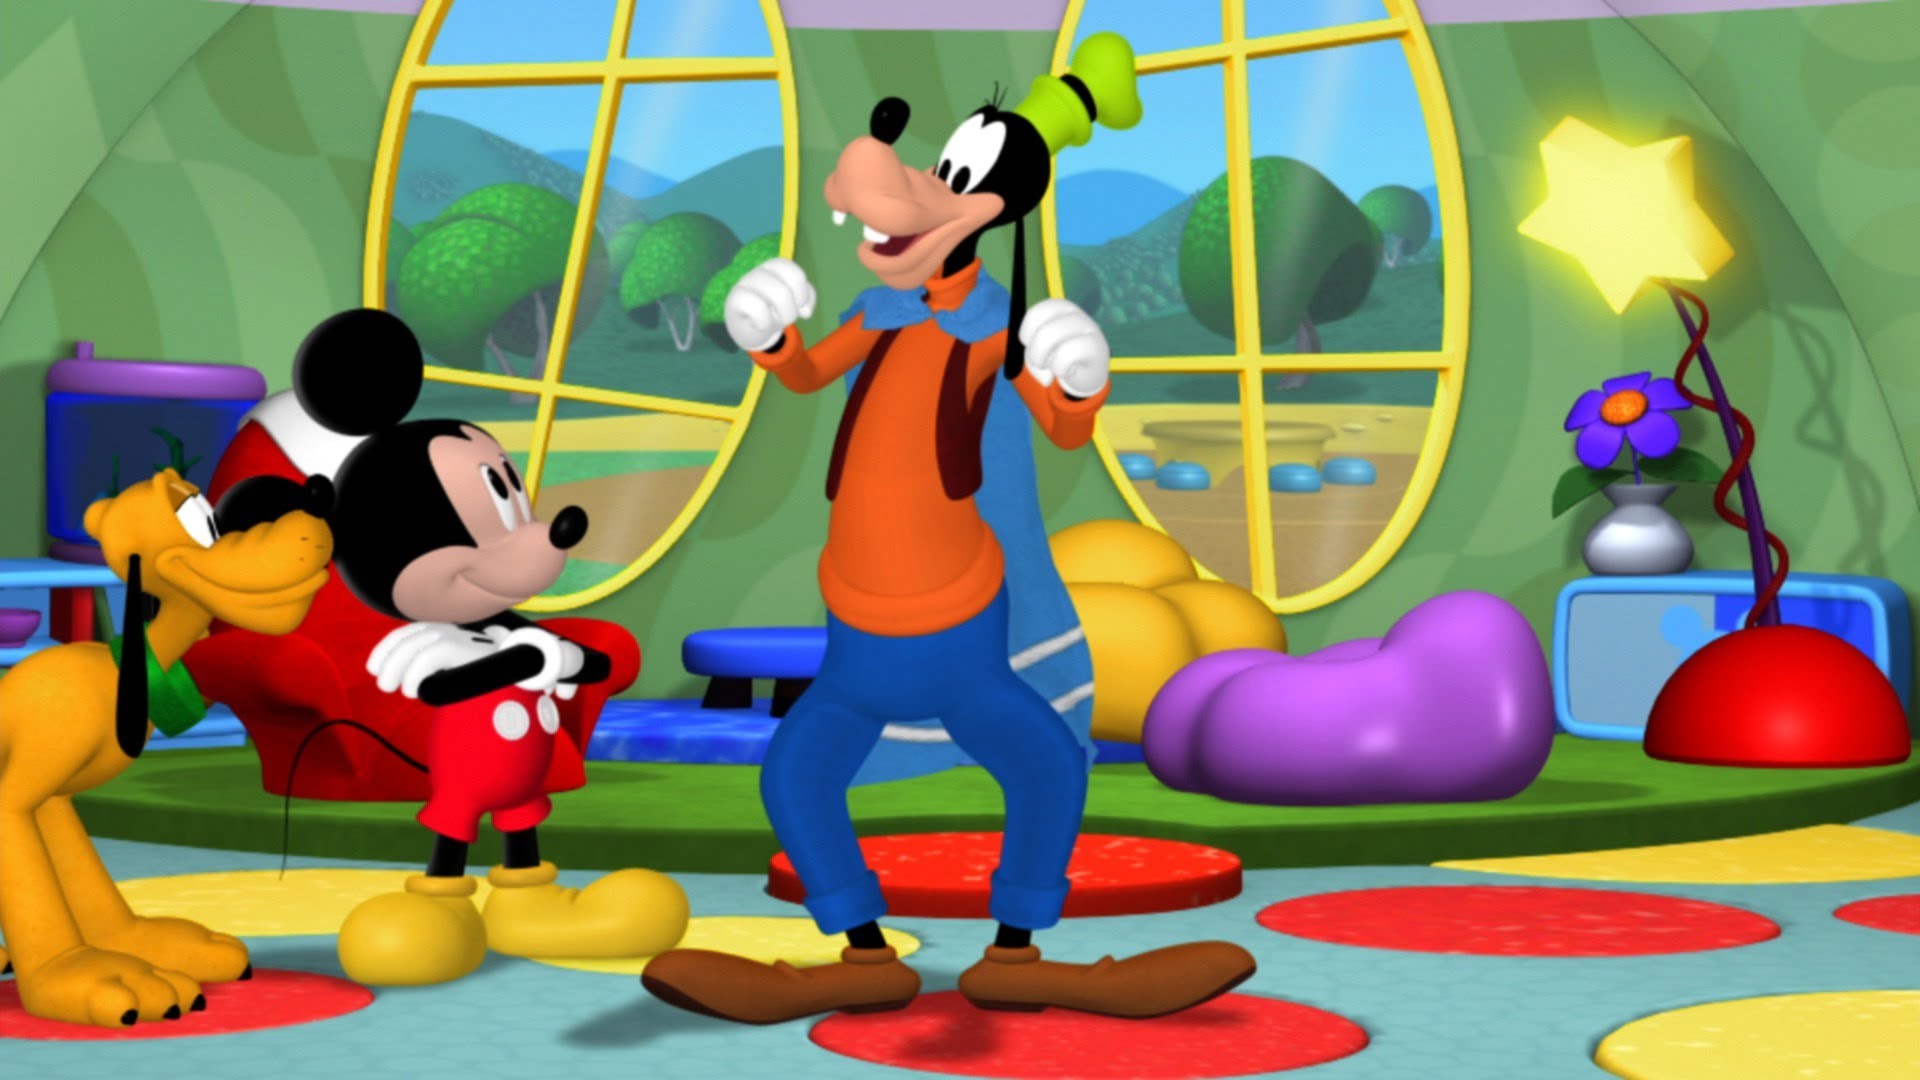 Goofy's Super Wish Mickey Mouse Clubhouse Episode Hd Wallpapers